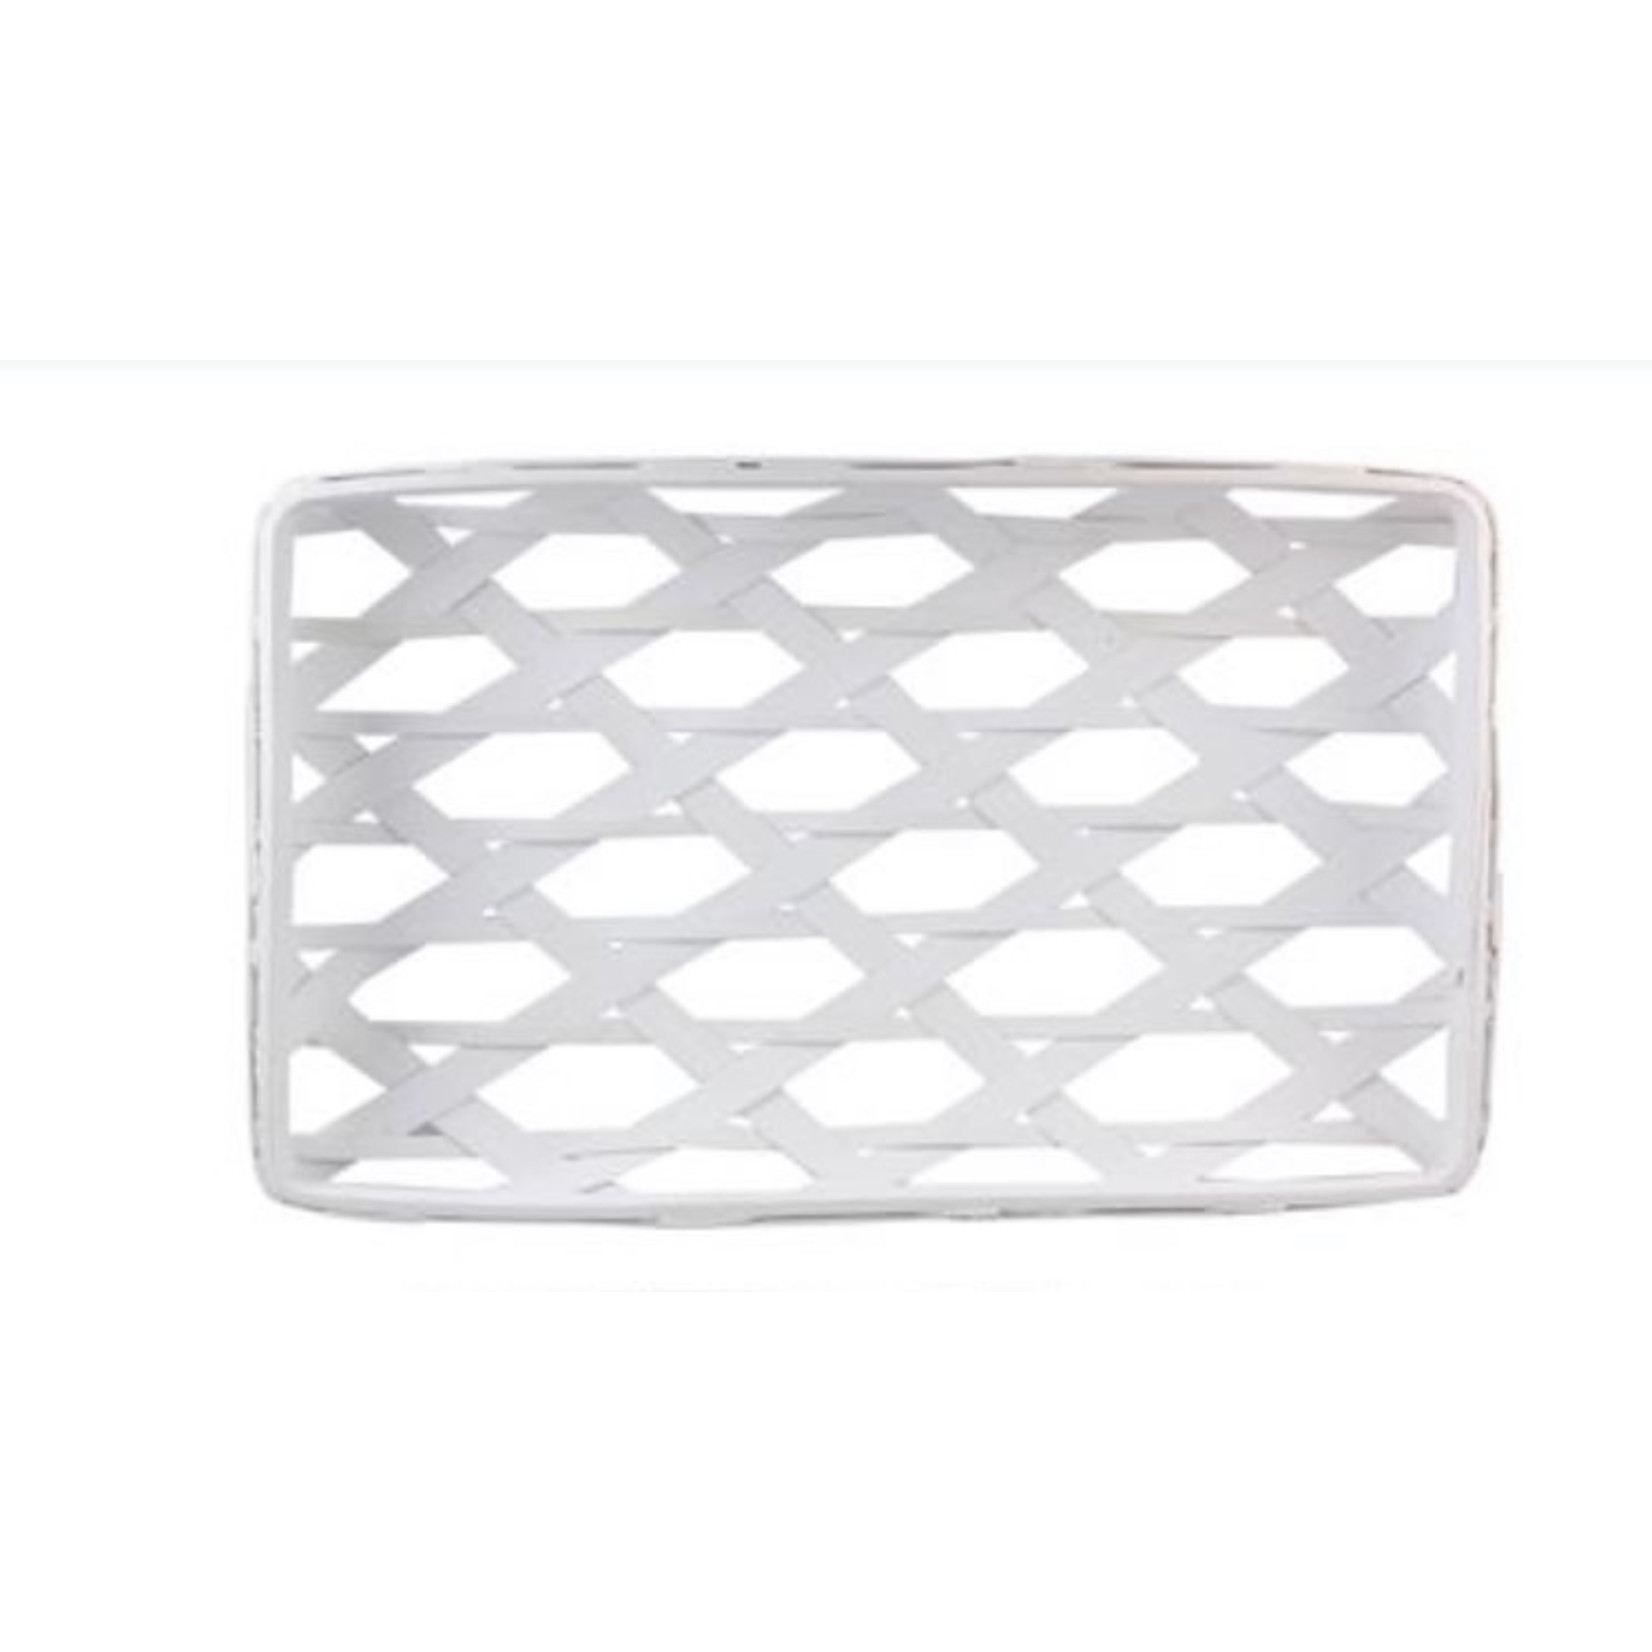 Youngs White Washed Wood Weaved Basket